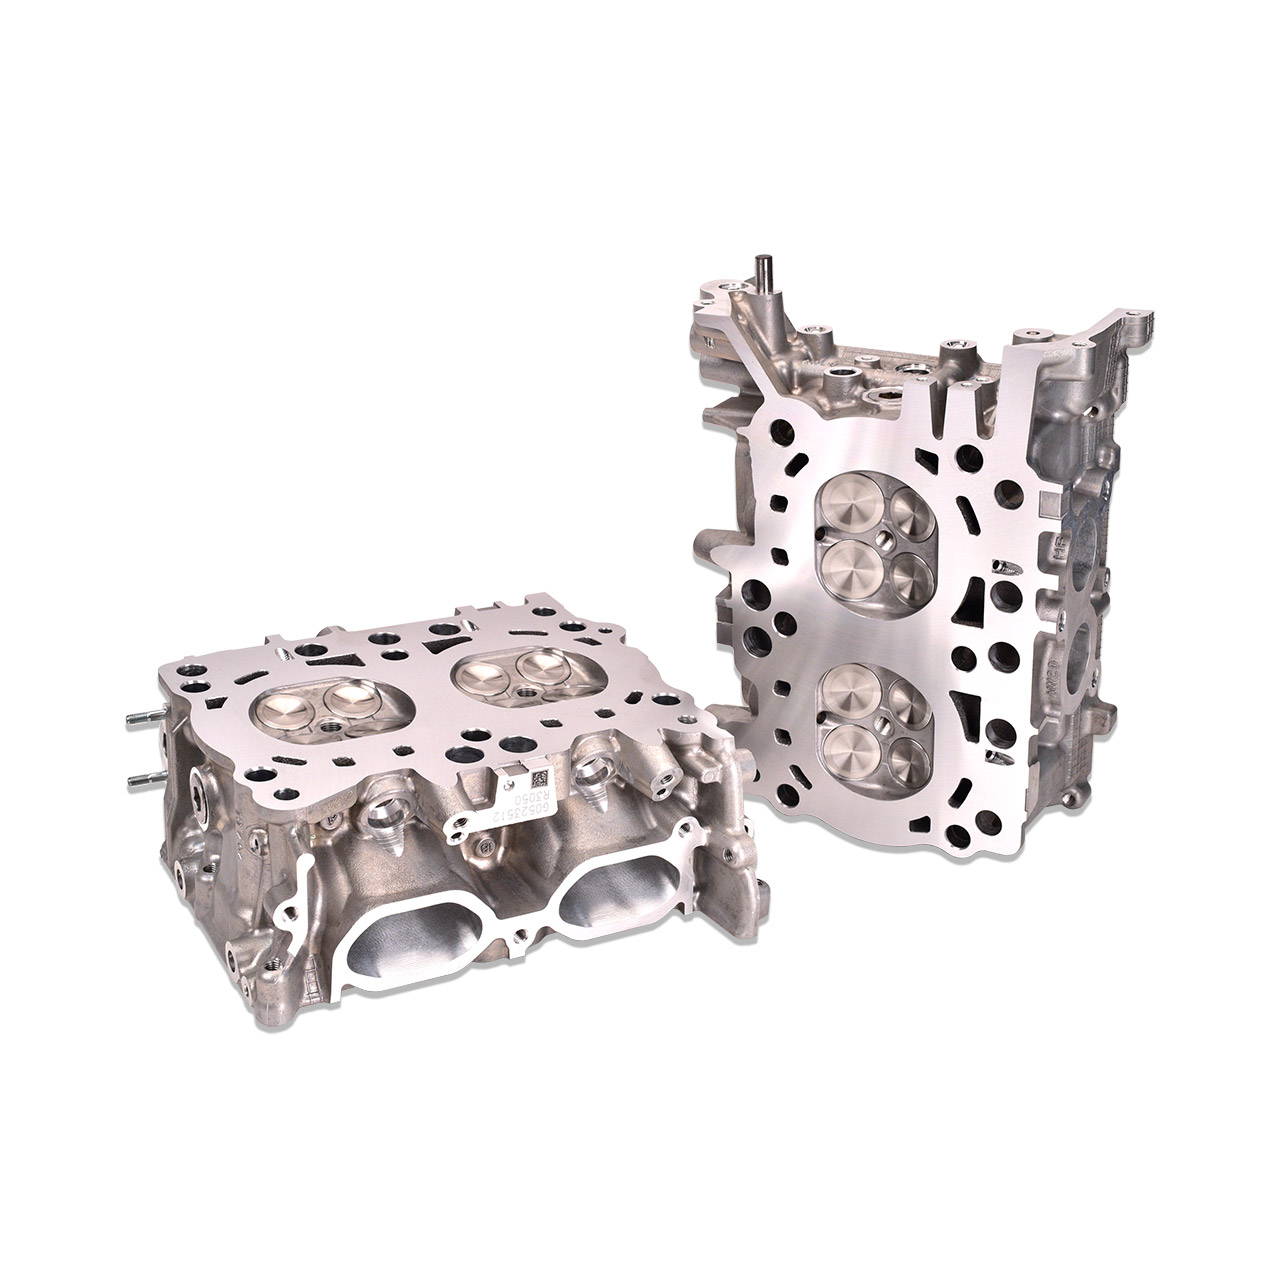 IAG 800 CNC Pocket Ported Competition Cylinder Head Package